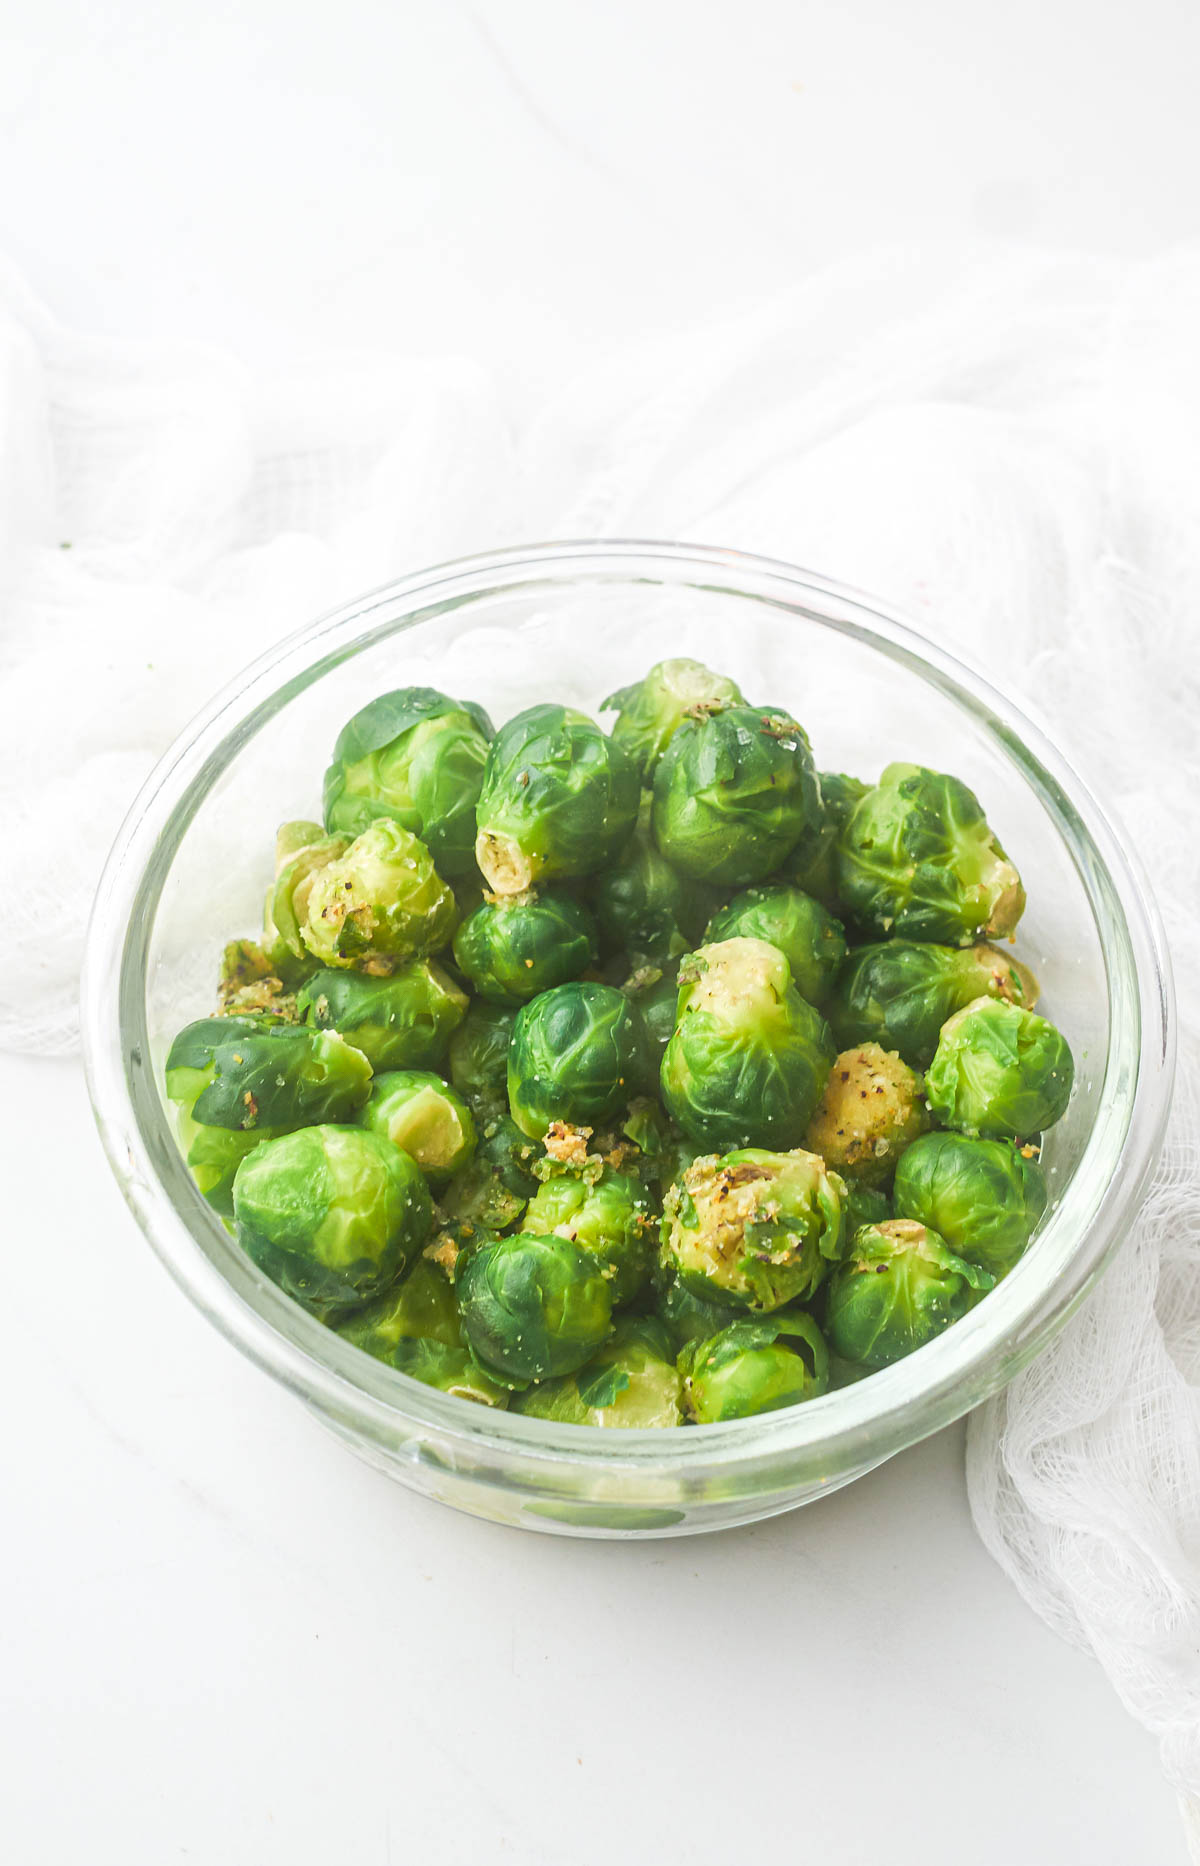 How To Cook Frozen Brussel Sprouts